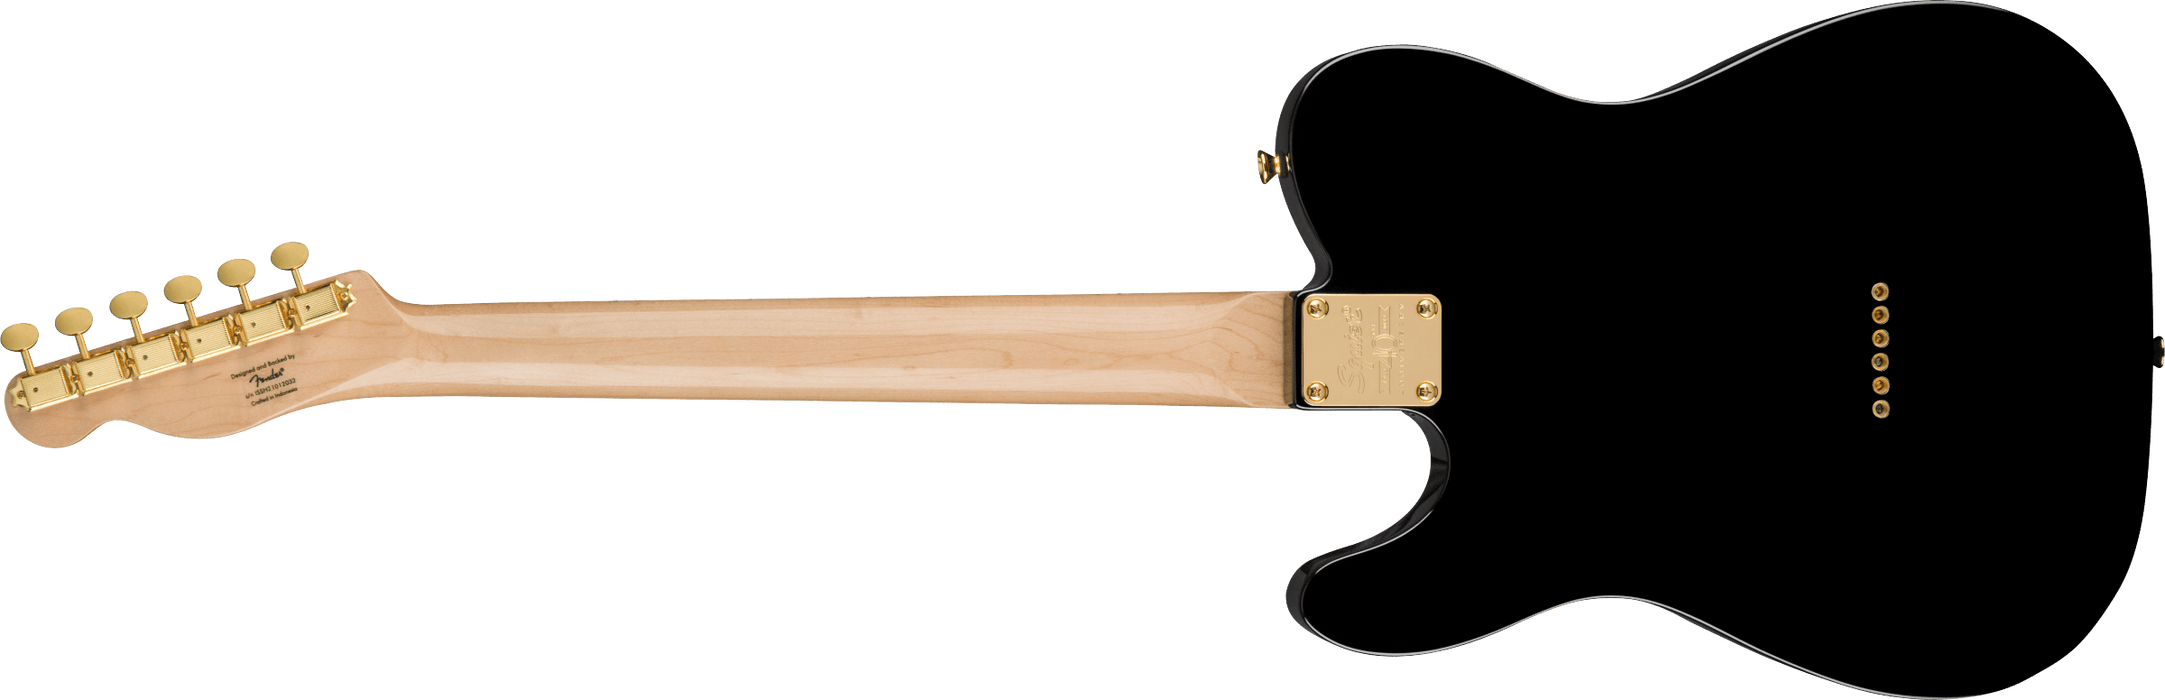 Fender Squier 40th Anniversary Telecaster®, Gold Edition, Laurel Fingerboard, Gold Anodized Pickguard, Black - Guitar Warehouse